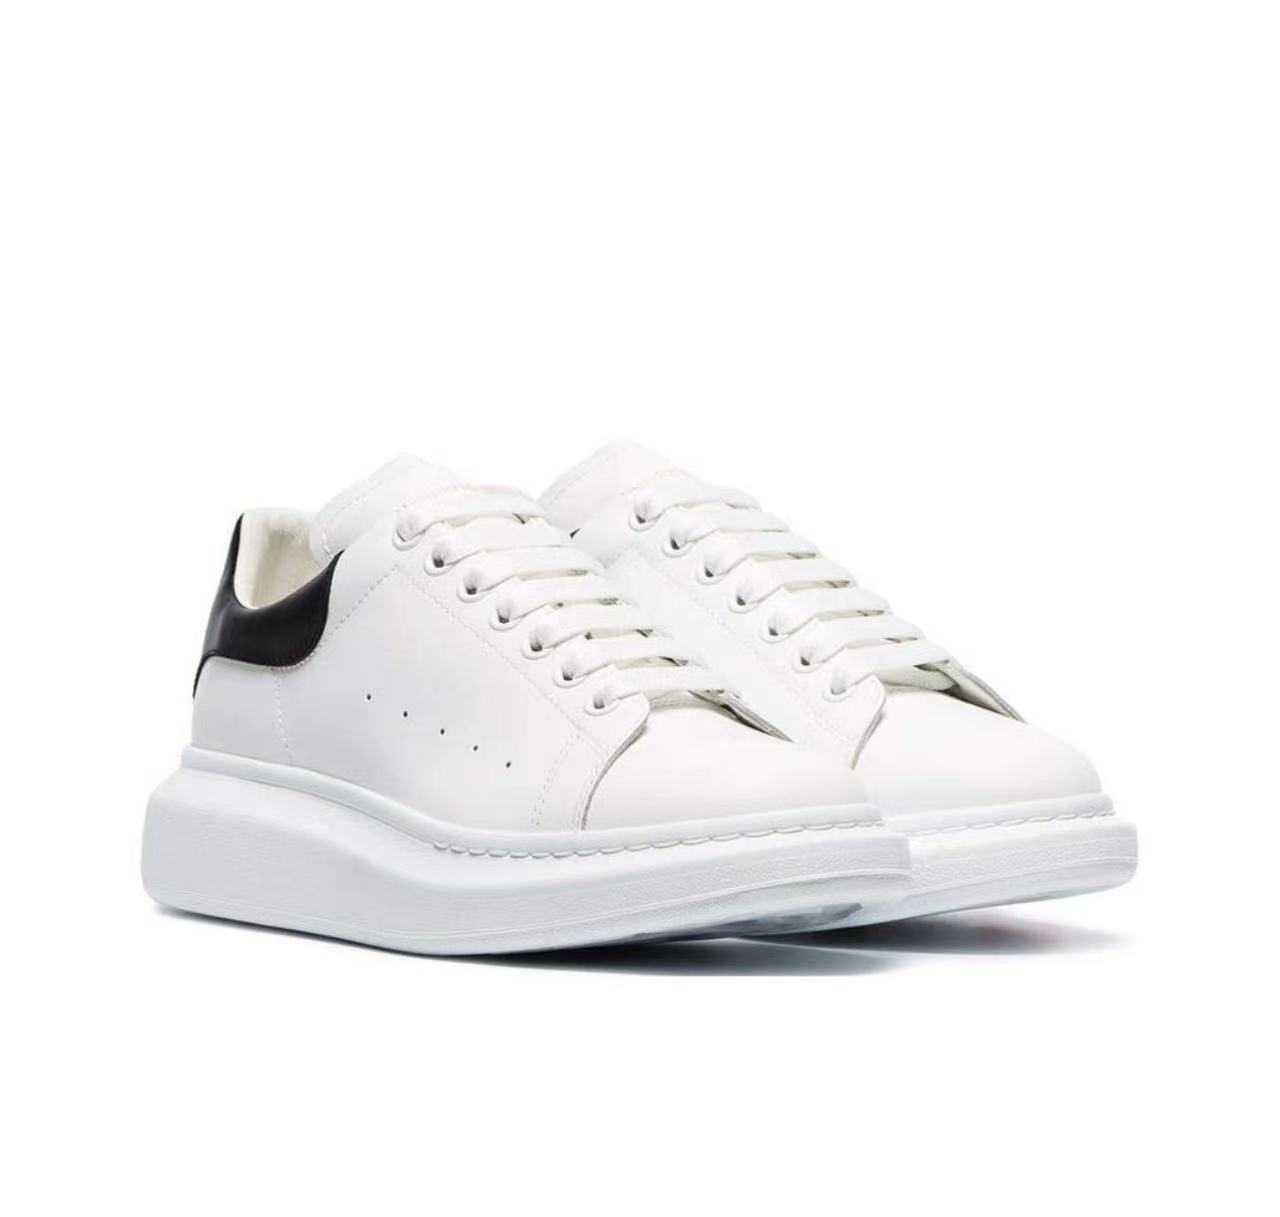 Alexander McQueen Men's Oversized Leather Sneakers Lily white Size US9-12